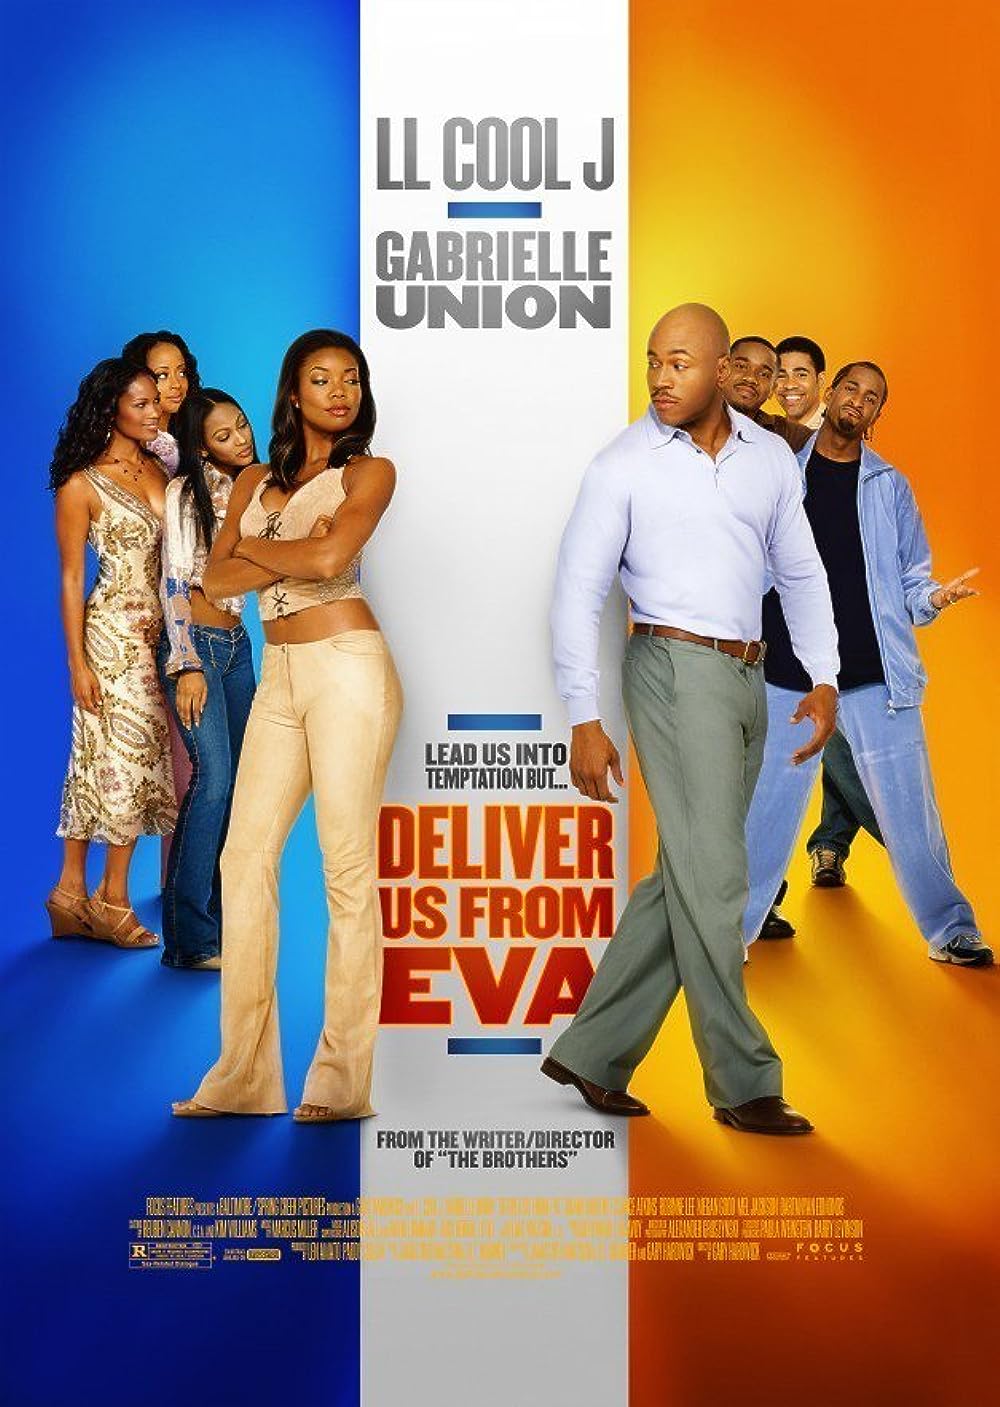 FULL MOVIE: Deliver Us From Eva (2003)